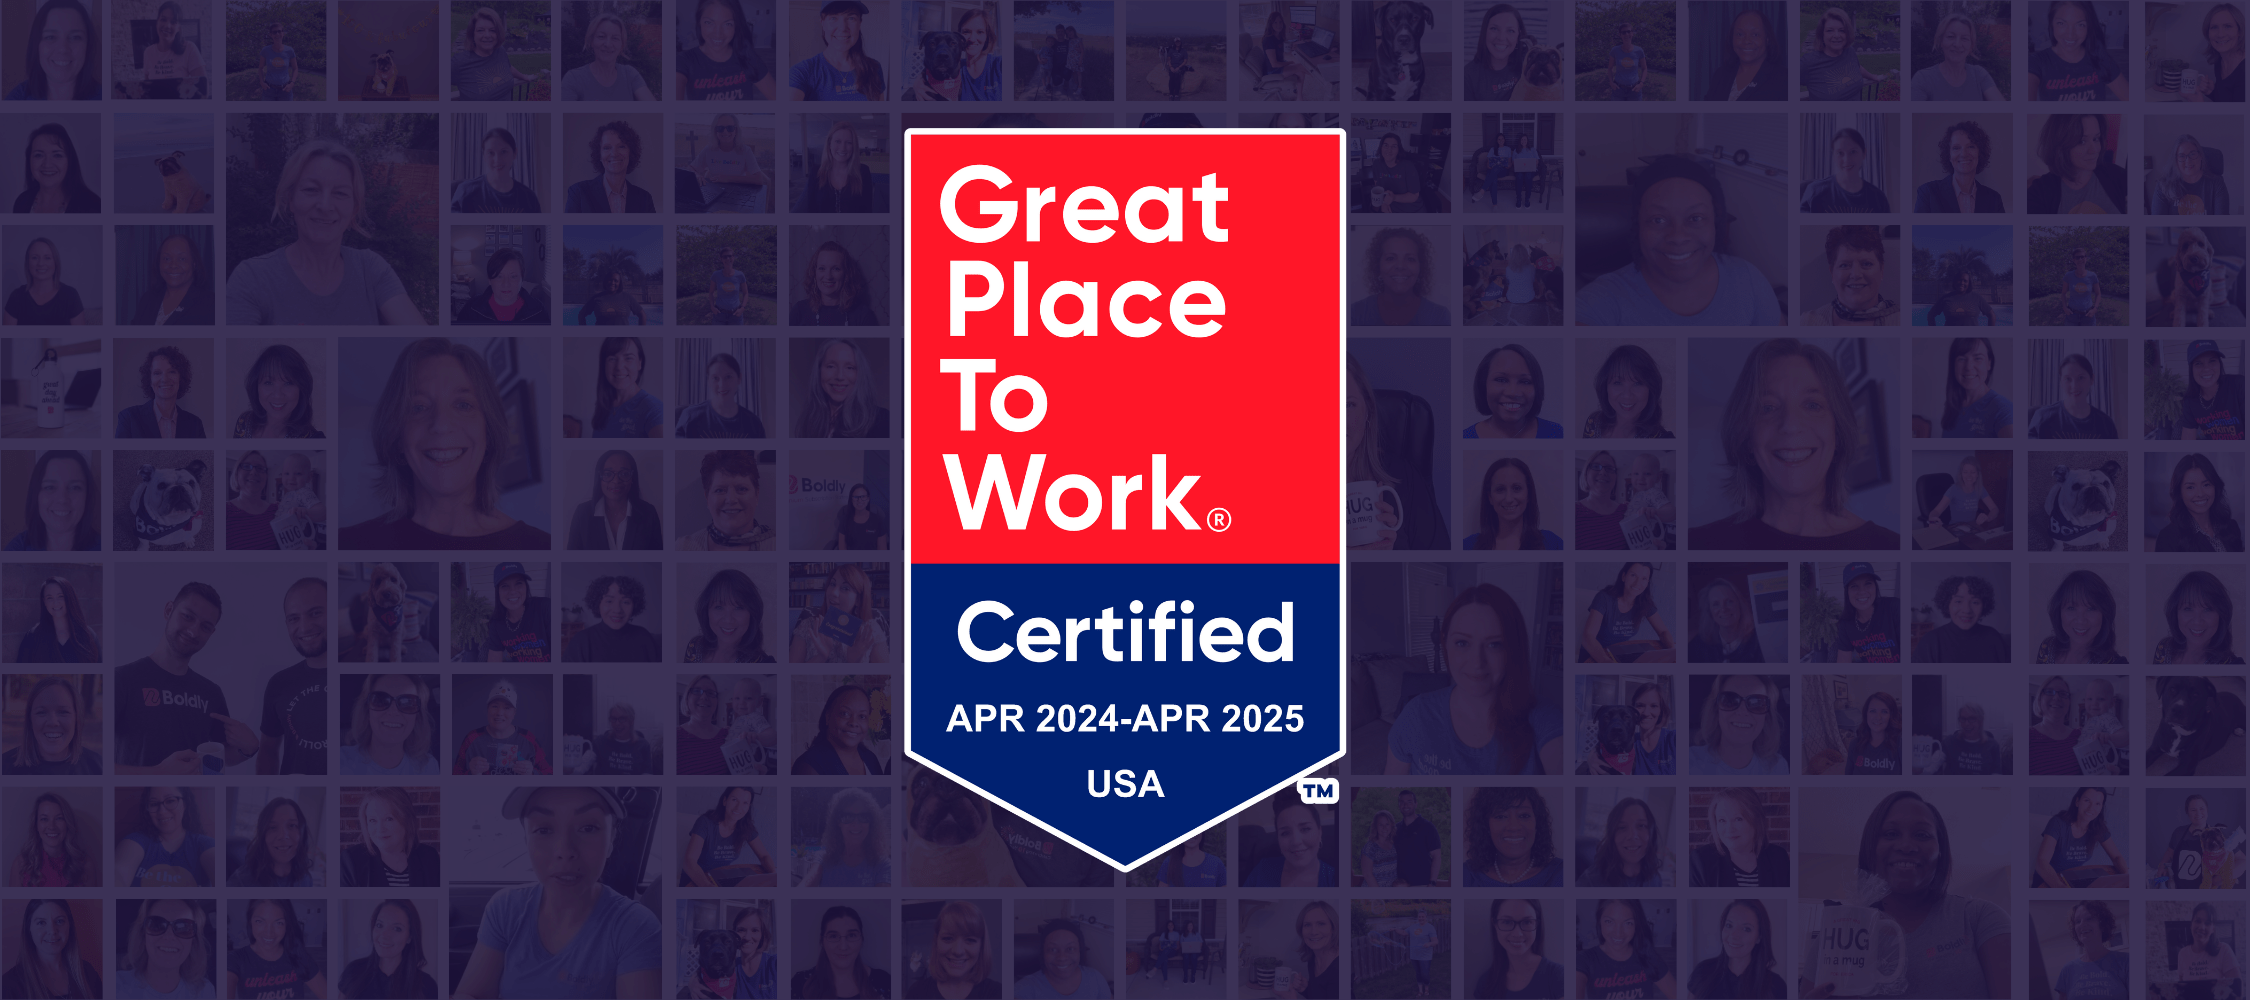 Collage of Boldly Team Members and Great Place To Work Certificaiton Badge